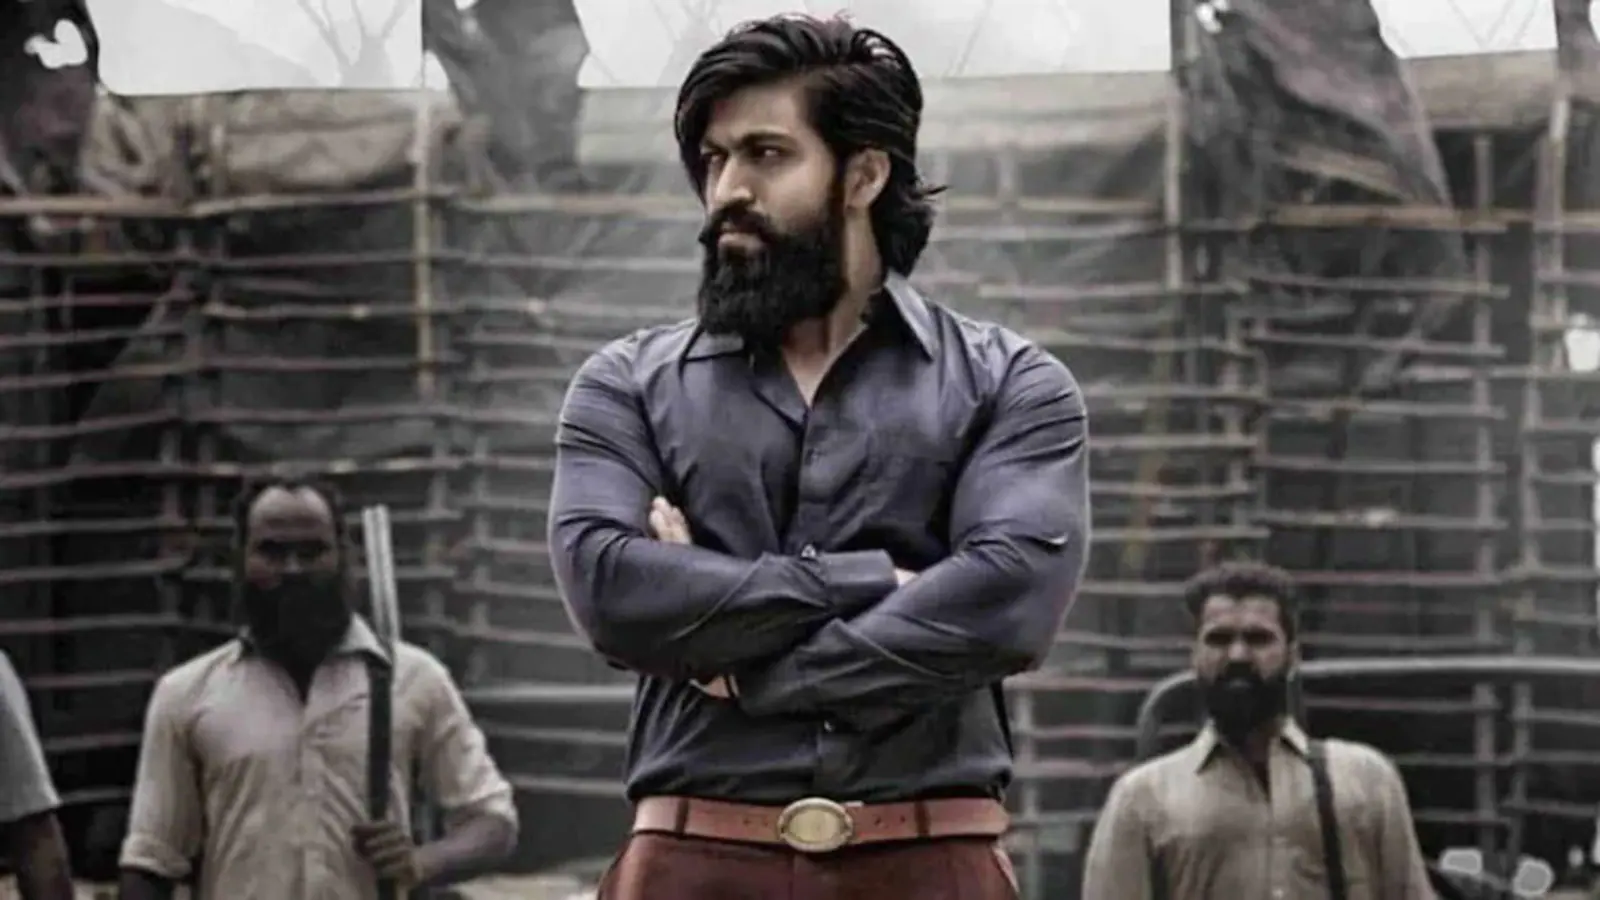 KGF Chapter 2’s ₹1200 crore haul included ₹1000 crore made just from India, only Baahubali 2 has managed this before